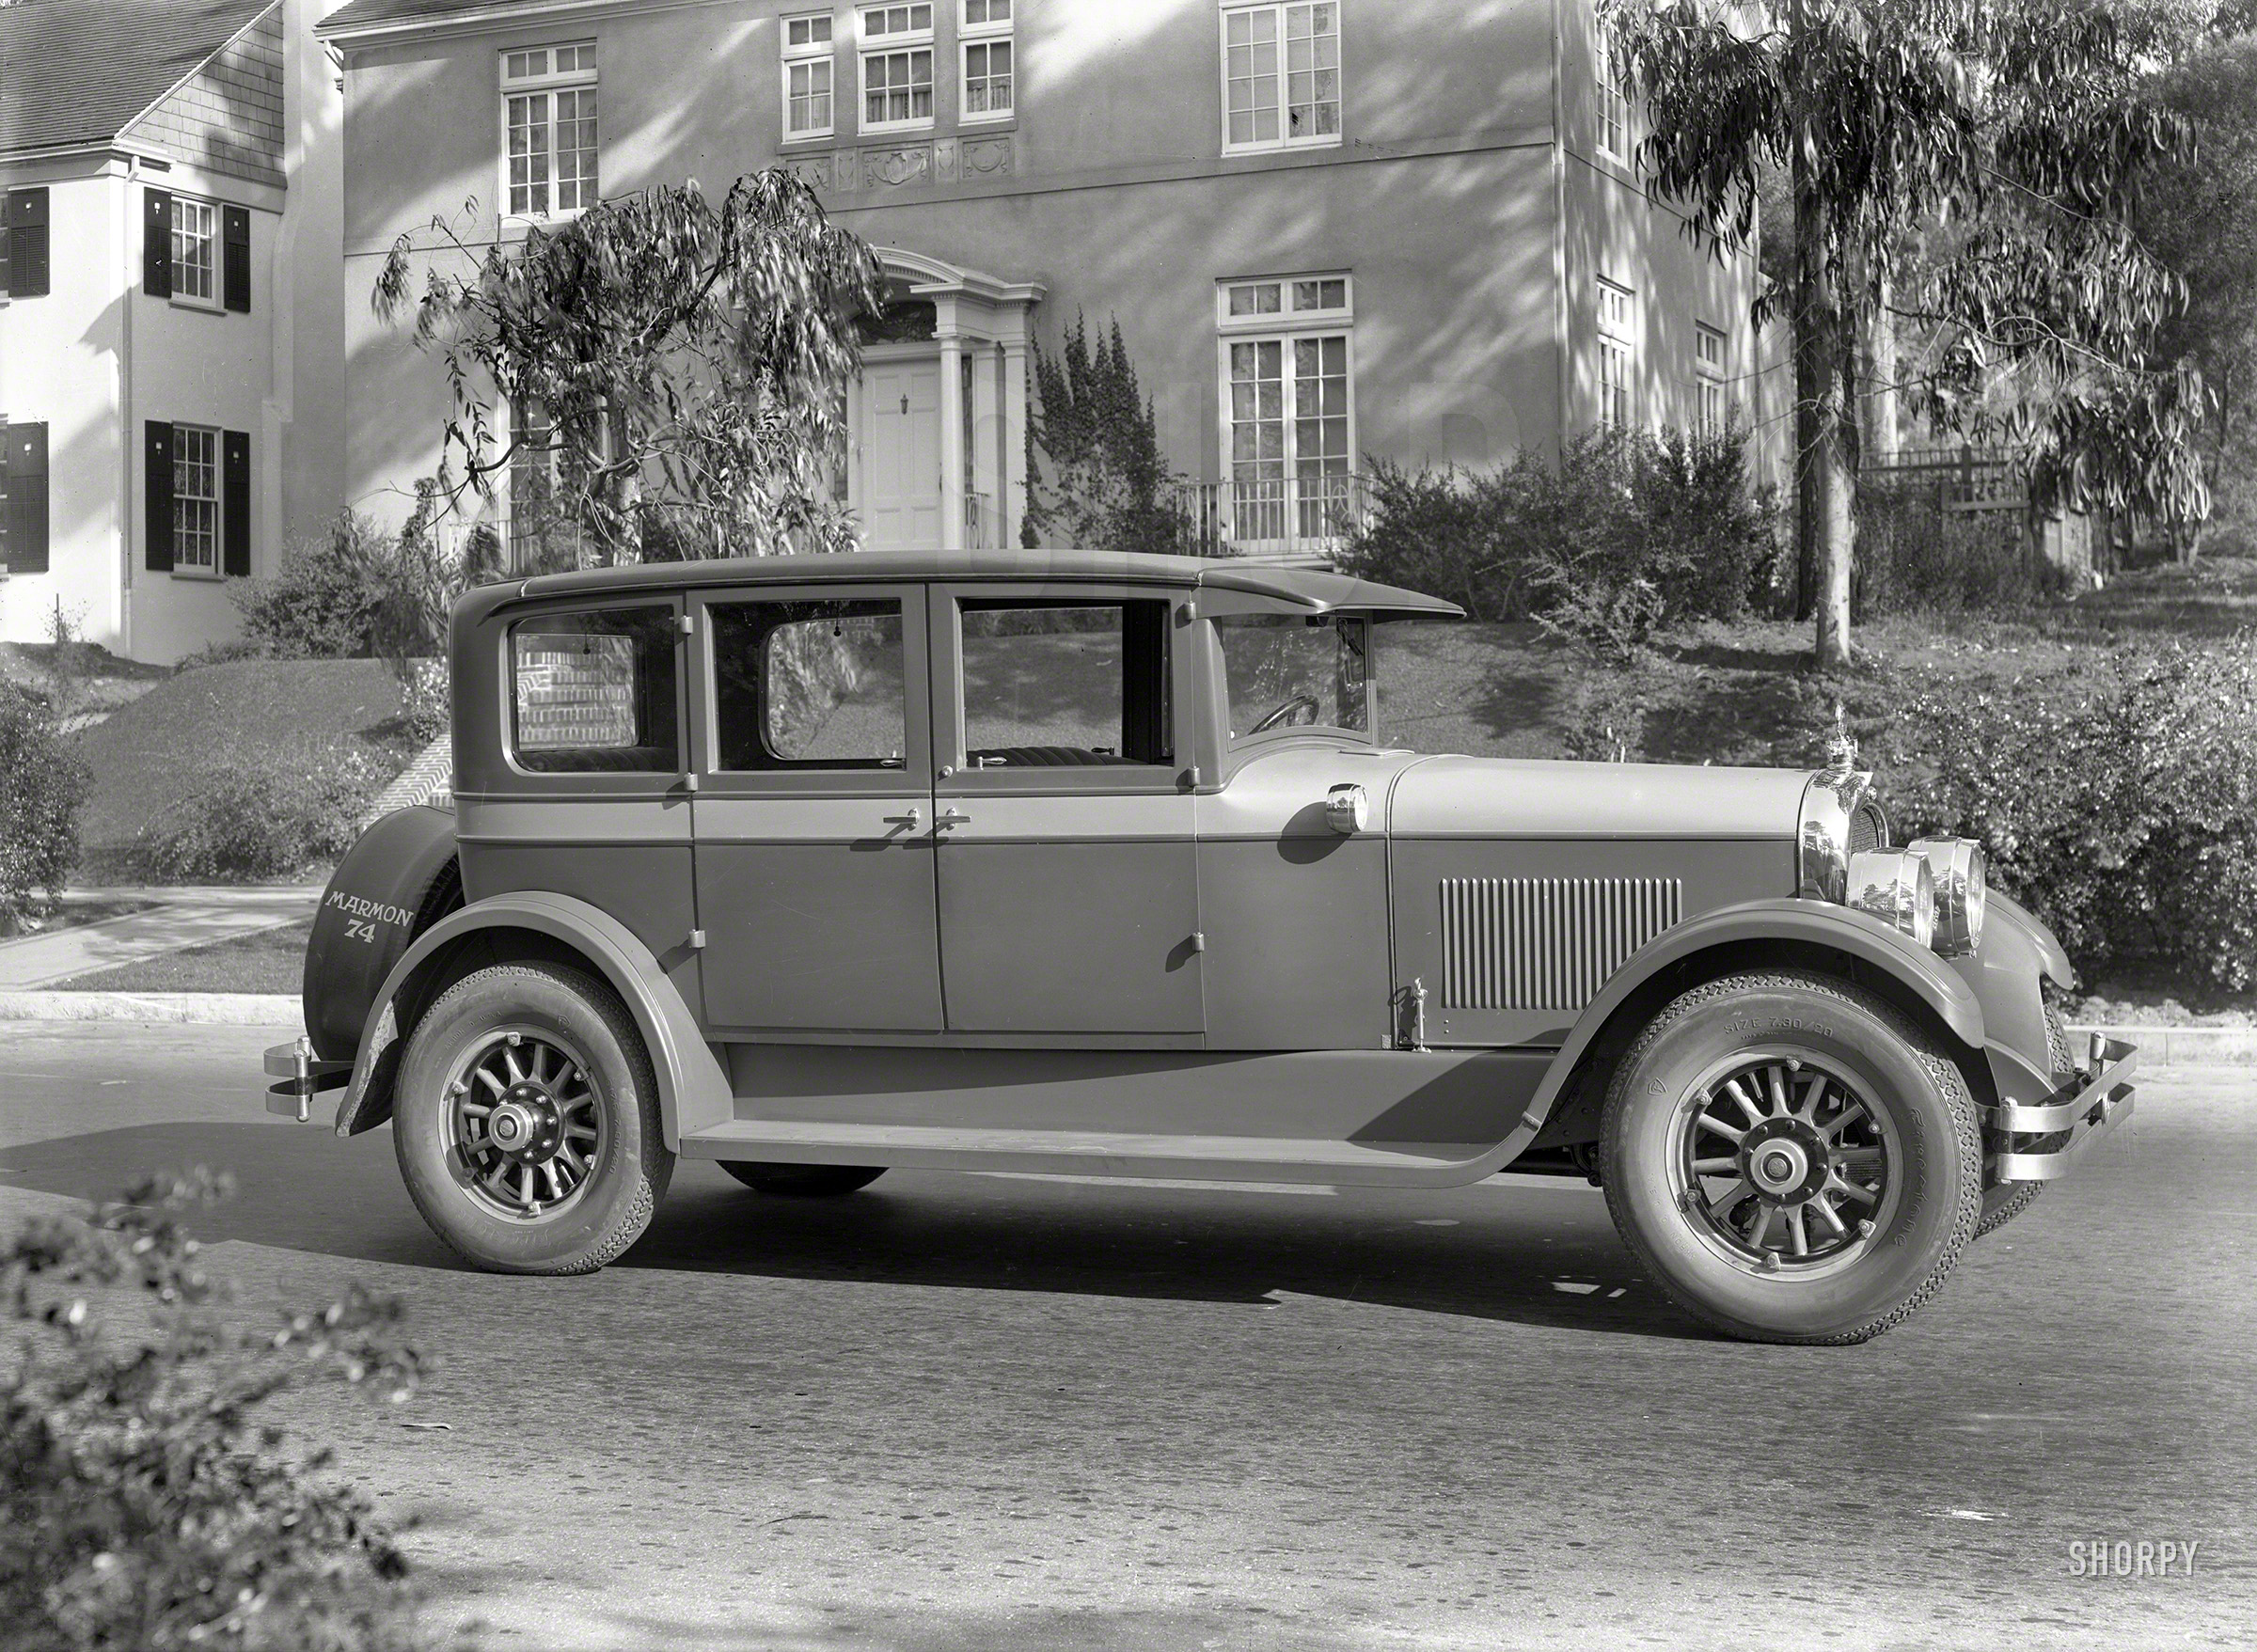 San Francisco circa 1925. "Marmon '74' Sedan." Advertised as "a luxurious closed car at practically the cost of an open car." Latest exhibit in the Shorpy Pantheon of Posthumous Phaetons. 5x7 glass negative by Christopher Helin. View full size.